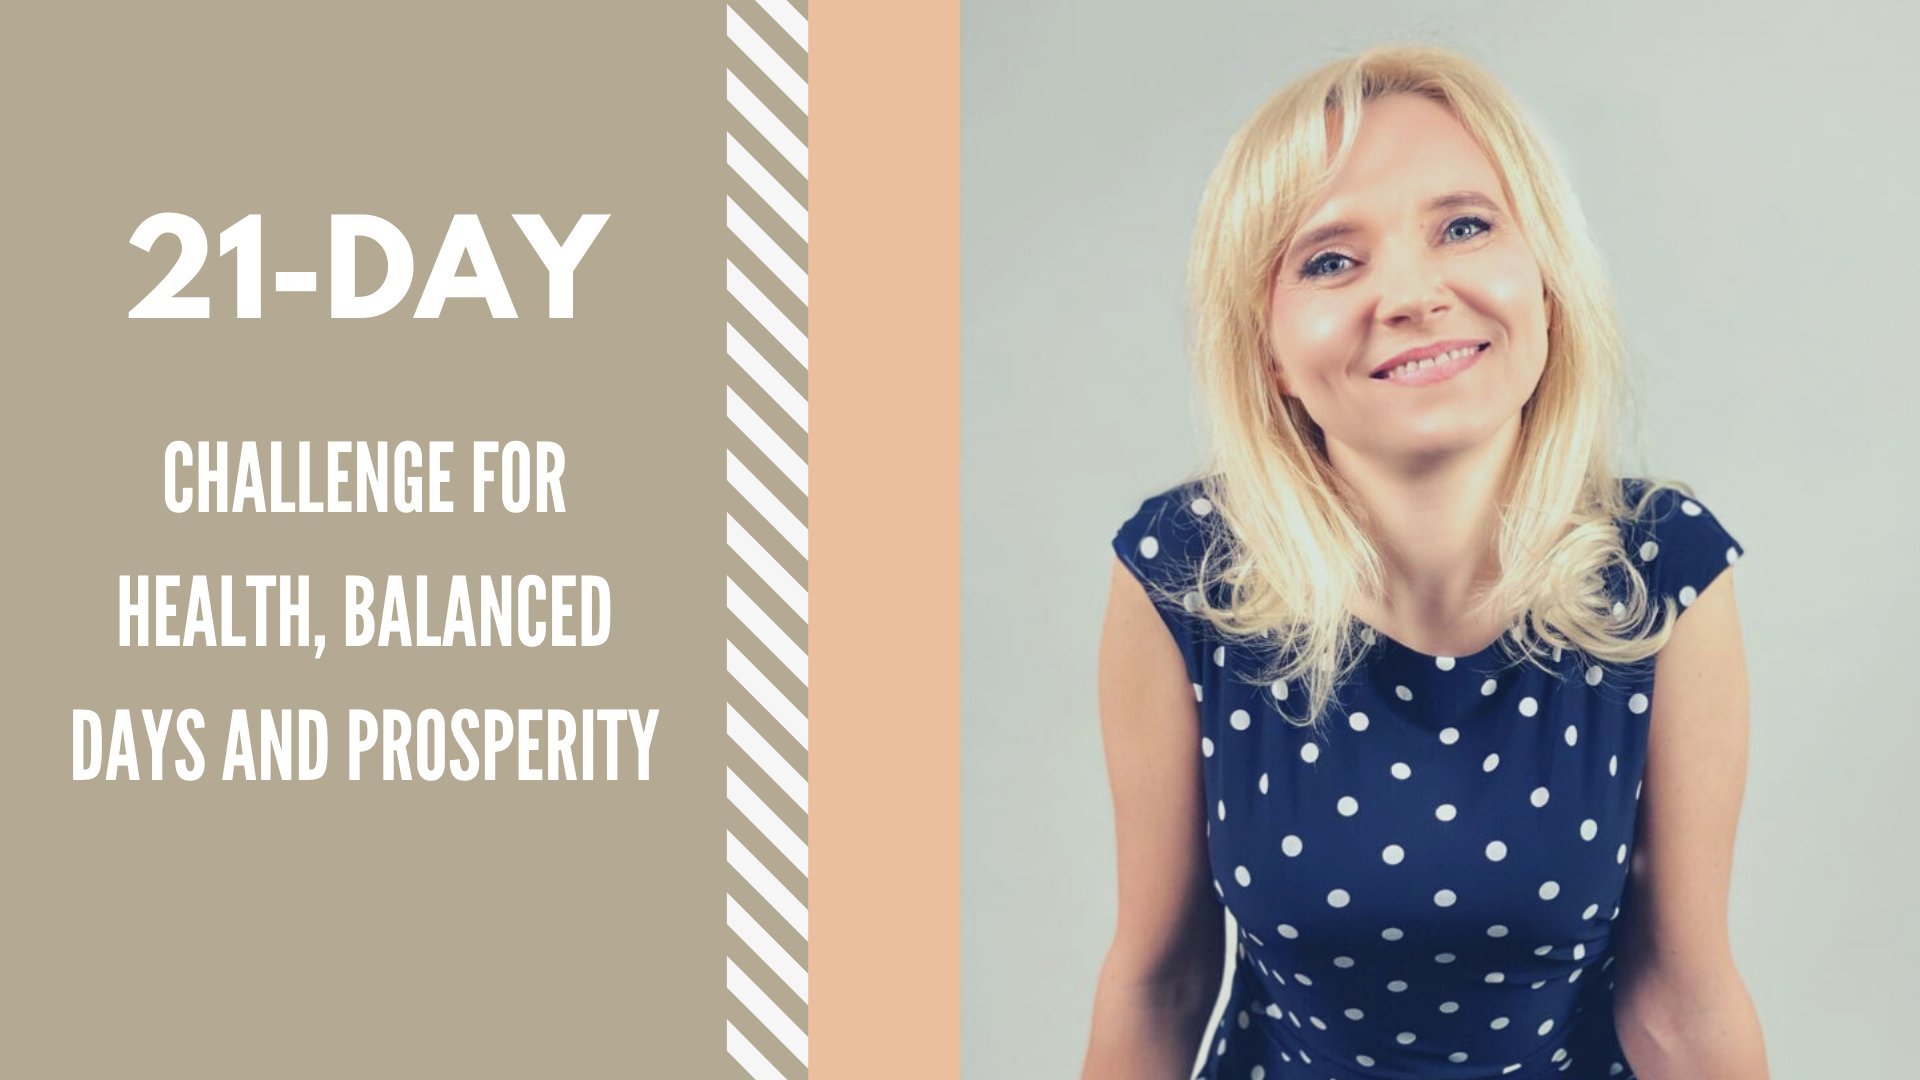 21 - DAY Challenge for Health, Balanced Days and Prosperity